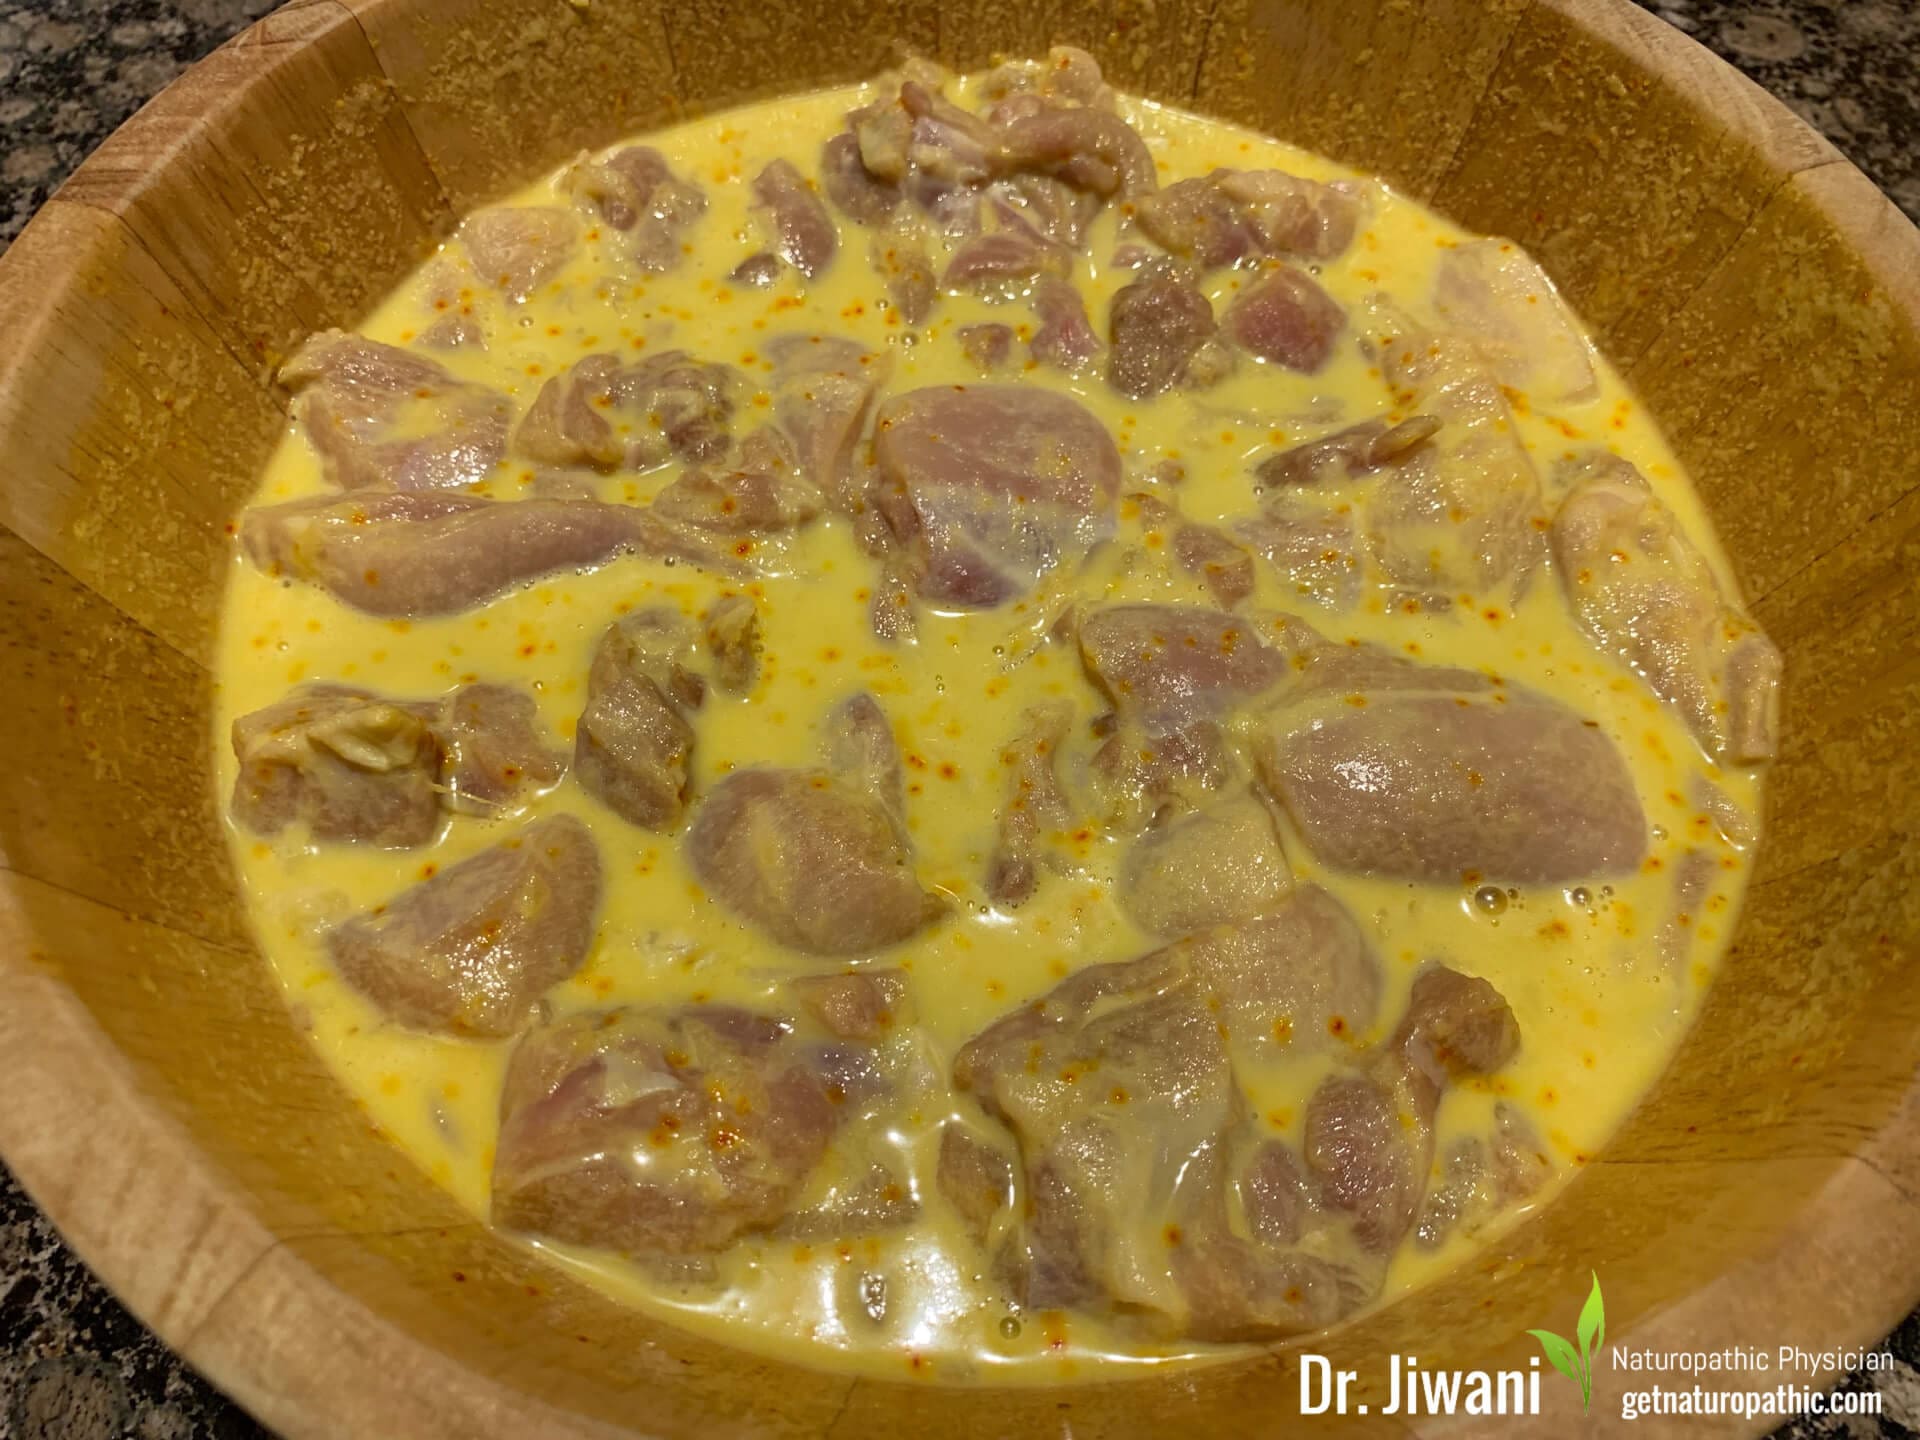 Dr. Jiwani’s Classic Chicken Curry  (Low Carb Dairy-Free) Recipe: Gluten-Free, Grain-Free, Egg-Free, Dairy-Free, Corn-Free, Soy-Free, Sugar-Free, Ideal For Diabetic, Paleo, Keto & Candida Diets | Dr. Jiwani's Naturopathic Nuggets Blog